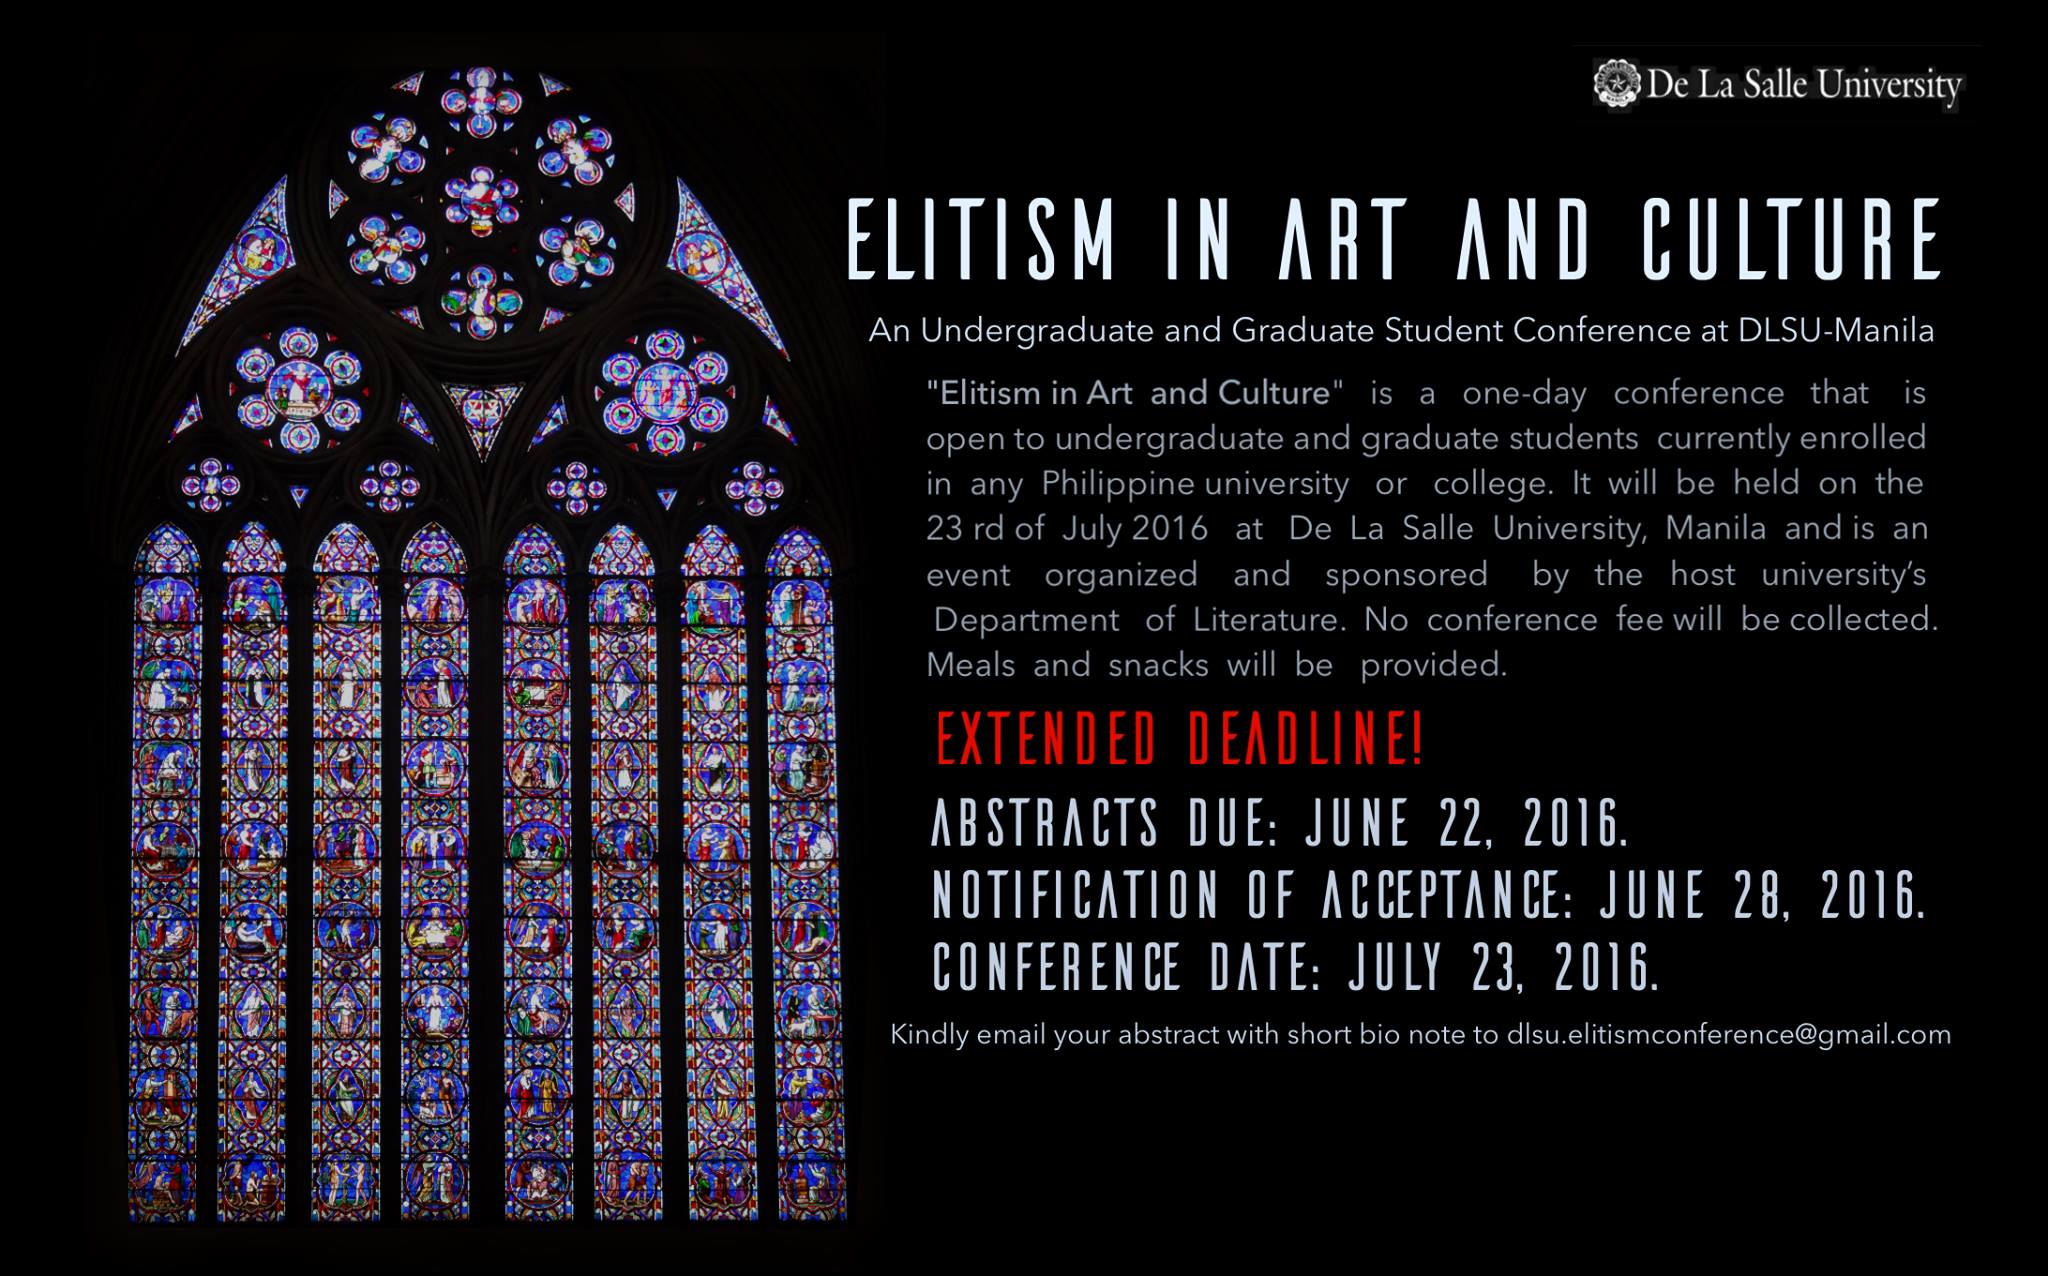 Elitism in Art and Culture: An Undergraduate and Graduate Conference at DLSU-Manila Hosted by Cultura July 23 2016, Saturday clock Today at 8 AM - 5 PM Happening Now · 86° Partly Cloudy pin Show Map De La Salle University 2401 Taft Avenue, 1004 Manila, Philippines “Elitism in Art and Culture”: An Undergraduate and Graduate Student Conference at DLSU-Manila “Elitism in Art and Culture” is a one-day conference that is open to undergraduate and graduate students currently enrolled in any Philippine university or college. It will be held on the 23rd of July 2016 at De La Salle University, Manila and is an event organized and sponsored by the host university’s Department of Literature. No conference fee will be collected. Meals and snacks will be provided. We invite abstracts (~250 words) from qualified students on topics, which may include but are not limited to: High/ Low Culture High Theory Modernism Anti-intellectualism Popular Culture Public Intellectuals University Rankings The Middle Class Marxist approaches to culture Art and Activism Literary Awards The Canon English Departments Indie Films Taste Art and Social Media Regional Literatures Provincialism Fascism Abstracts are to be electronically submitted on or before the 15th of June 2016. Kindly email your abstract with short bio note to dlsu.elitismconference@gmail.com Acceptance letters will be sent out by the 24th of June 2016. Exceptional participants coming from outside Metro Manila are eligible to receive travel assistance. Those interested and qualified may request for a travel bursary in their email. Abstracts Due: June 15, 2016. Notification of Acceptance: June 24, 2016. Conference Date: July 23, 2016. NOTE: Only those with approved papers will be allowed to enter the venue. ----- News Feed RECENT ACTIVITY Jeremy De Chavez June 29 at 4:37pm · Parallel Session 2 (Afternoon) Room Y409: Sariling Sikap: Mga Pagpupumiglas mula sa Sinaunang